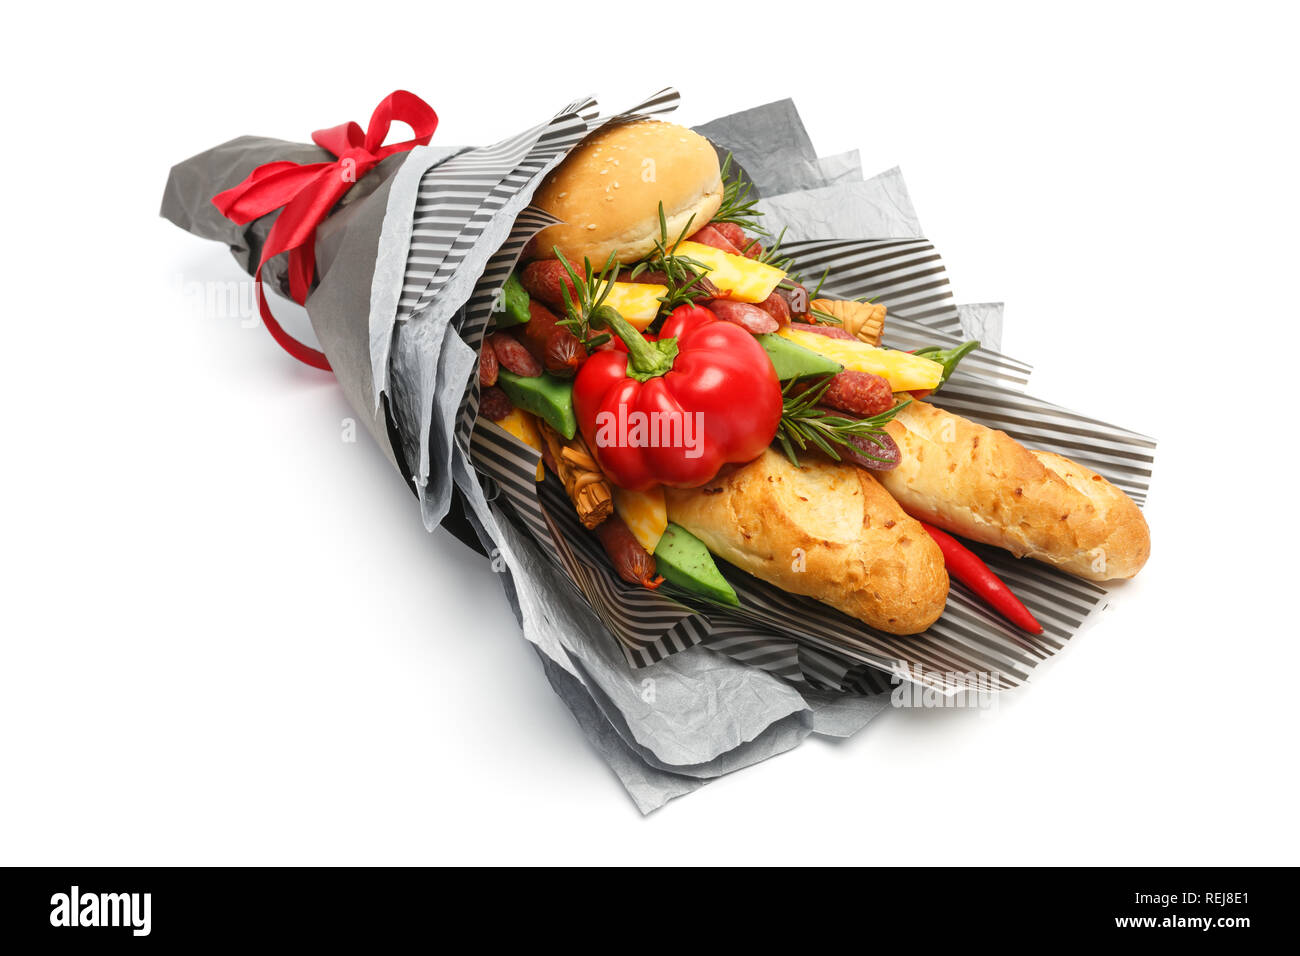 Wheat bread, sesame bun, cheese of different varieties, sausages and pepper are wrapped in gray paper as a gift bouquet on a white background. Side vi Stock Photo